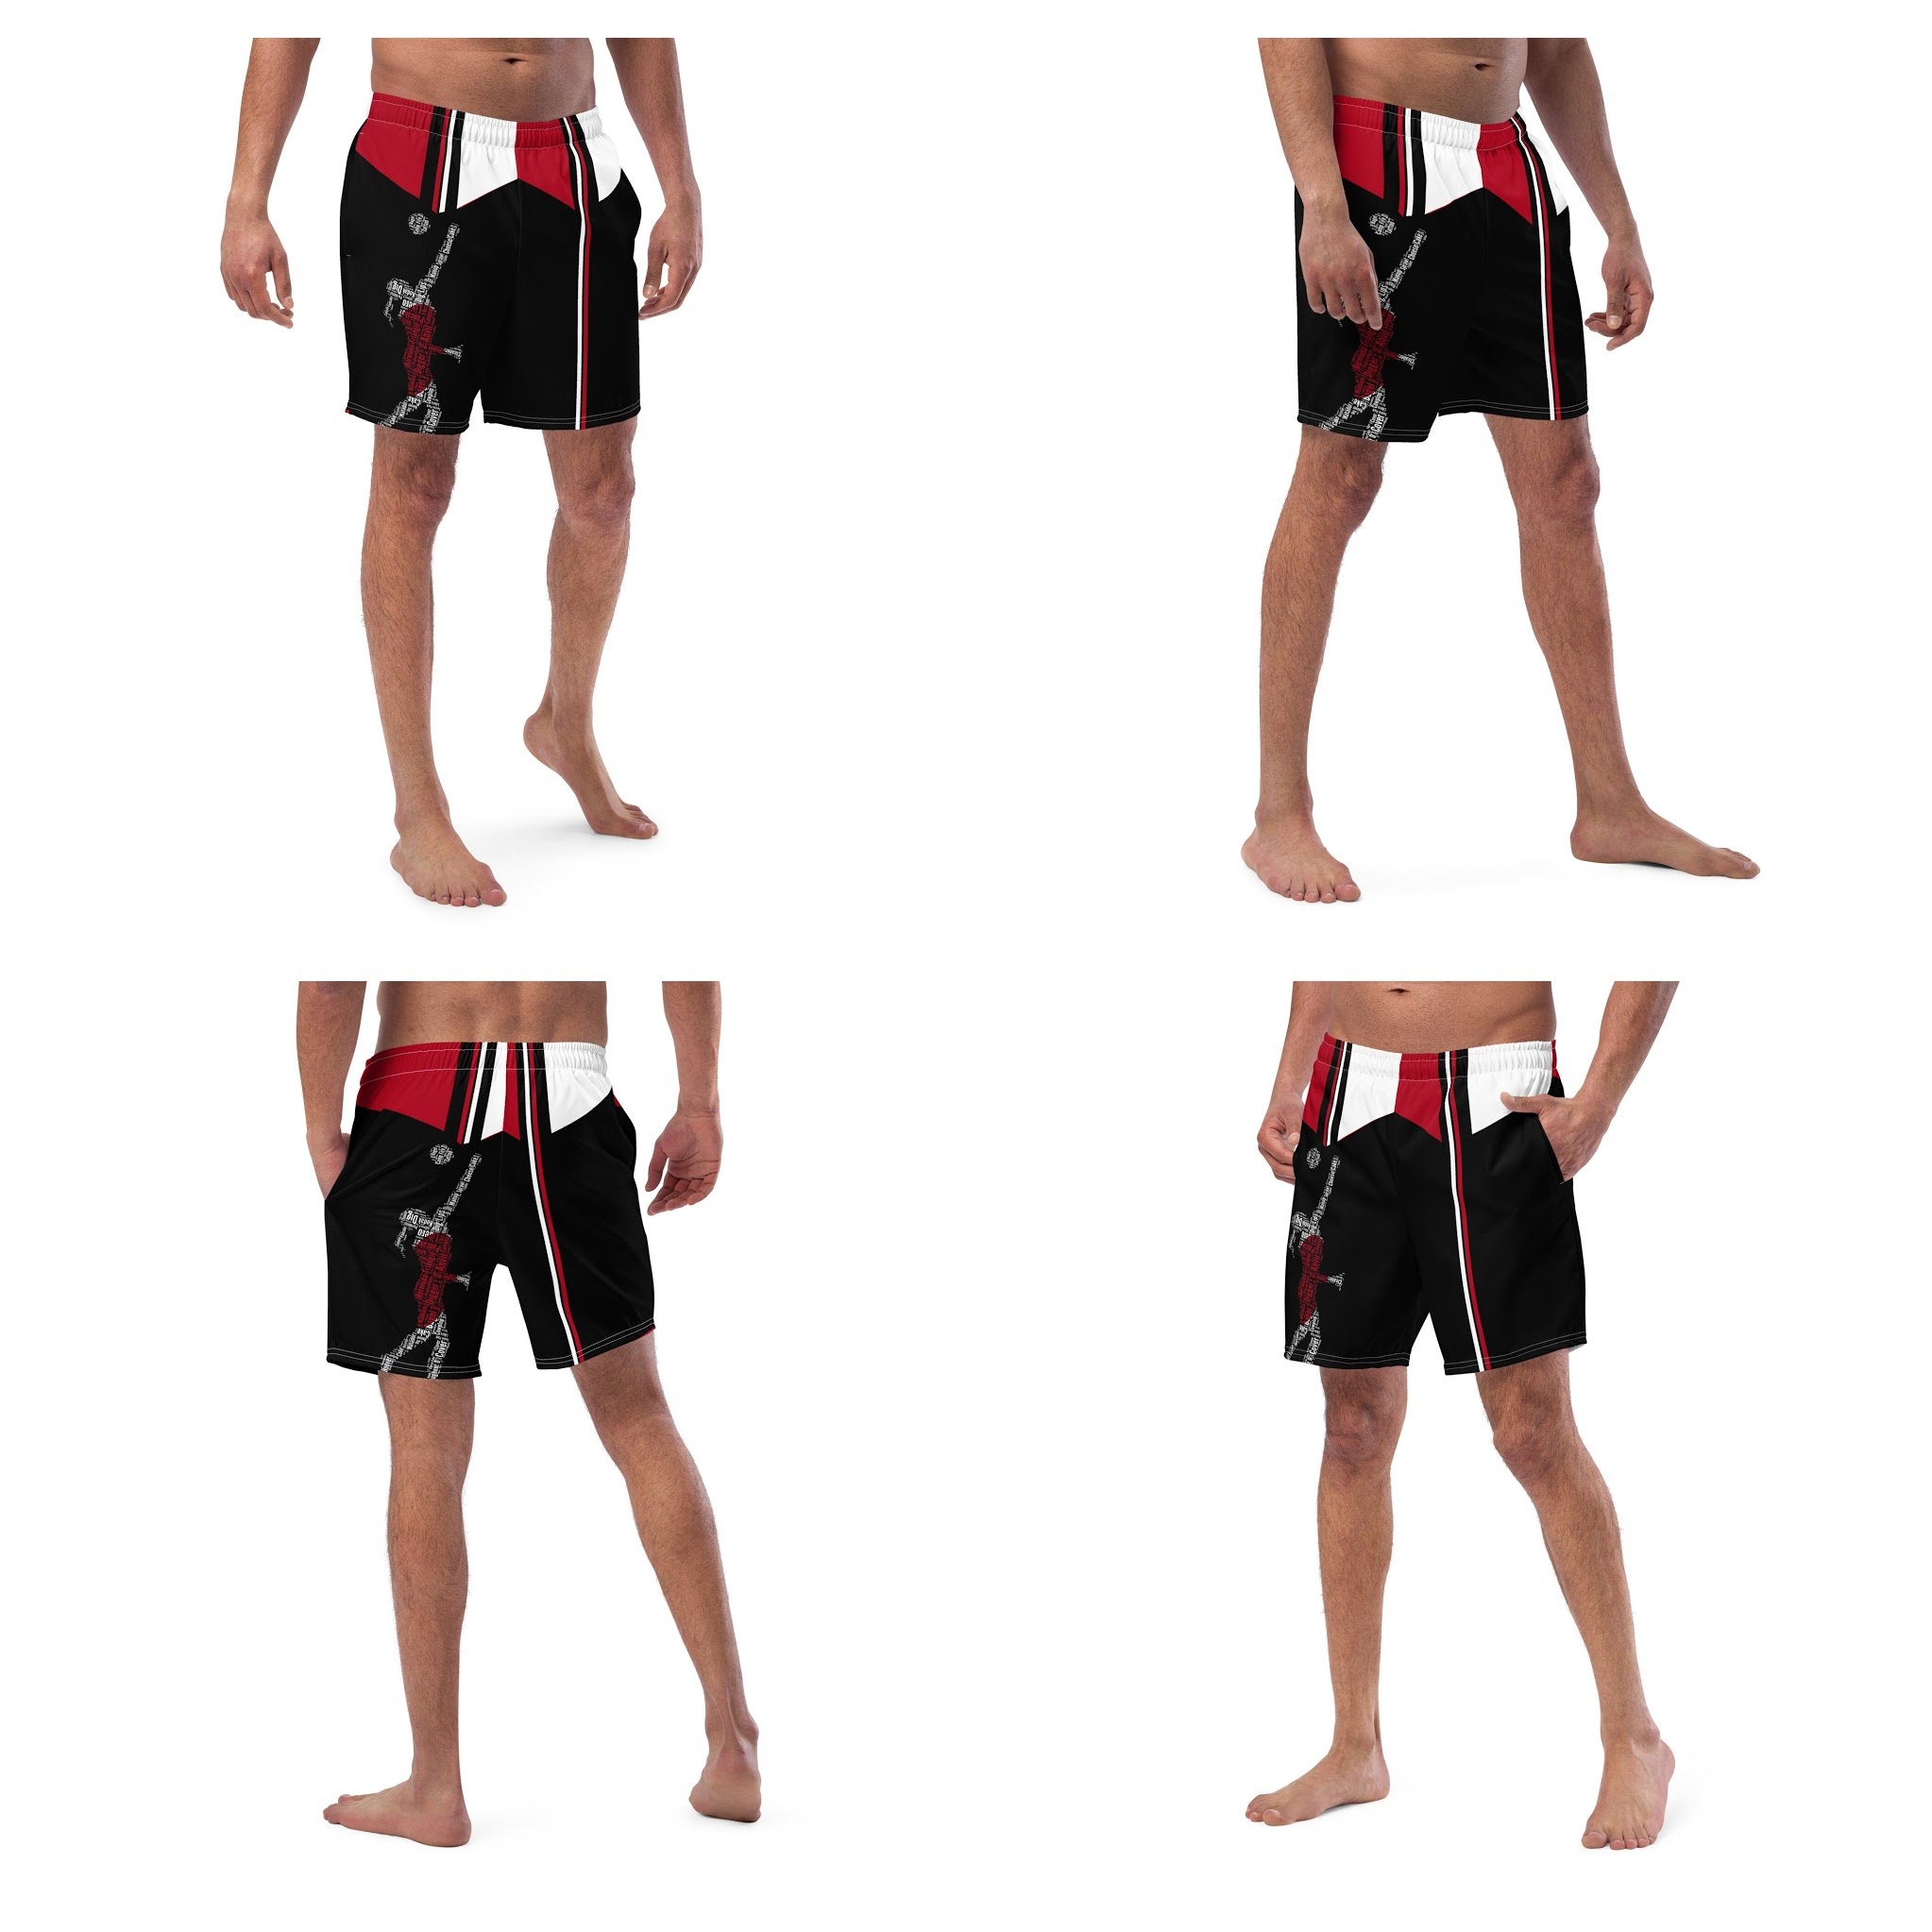 Beach volleyball demands not only energy and skill but also mens sand volleyball shorts that can withstand sand, sweat, windy environments and intense plays.